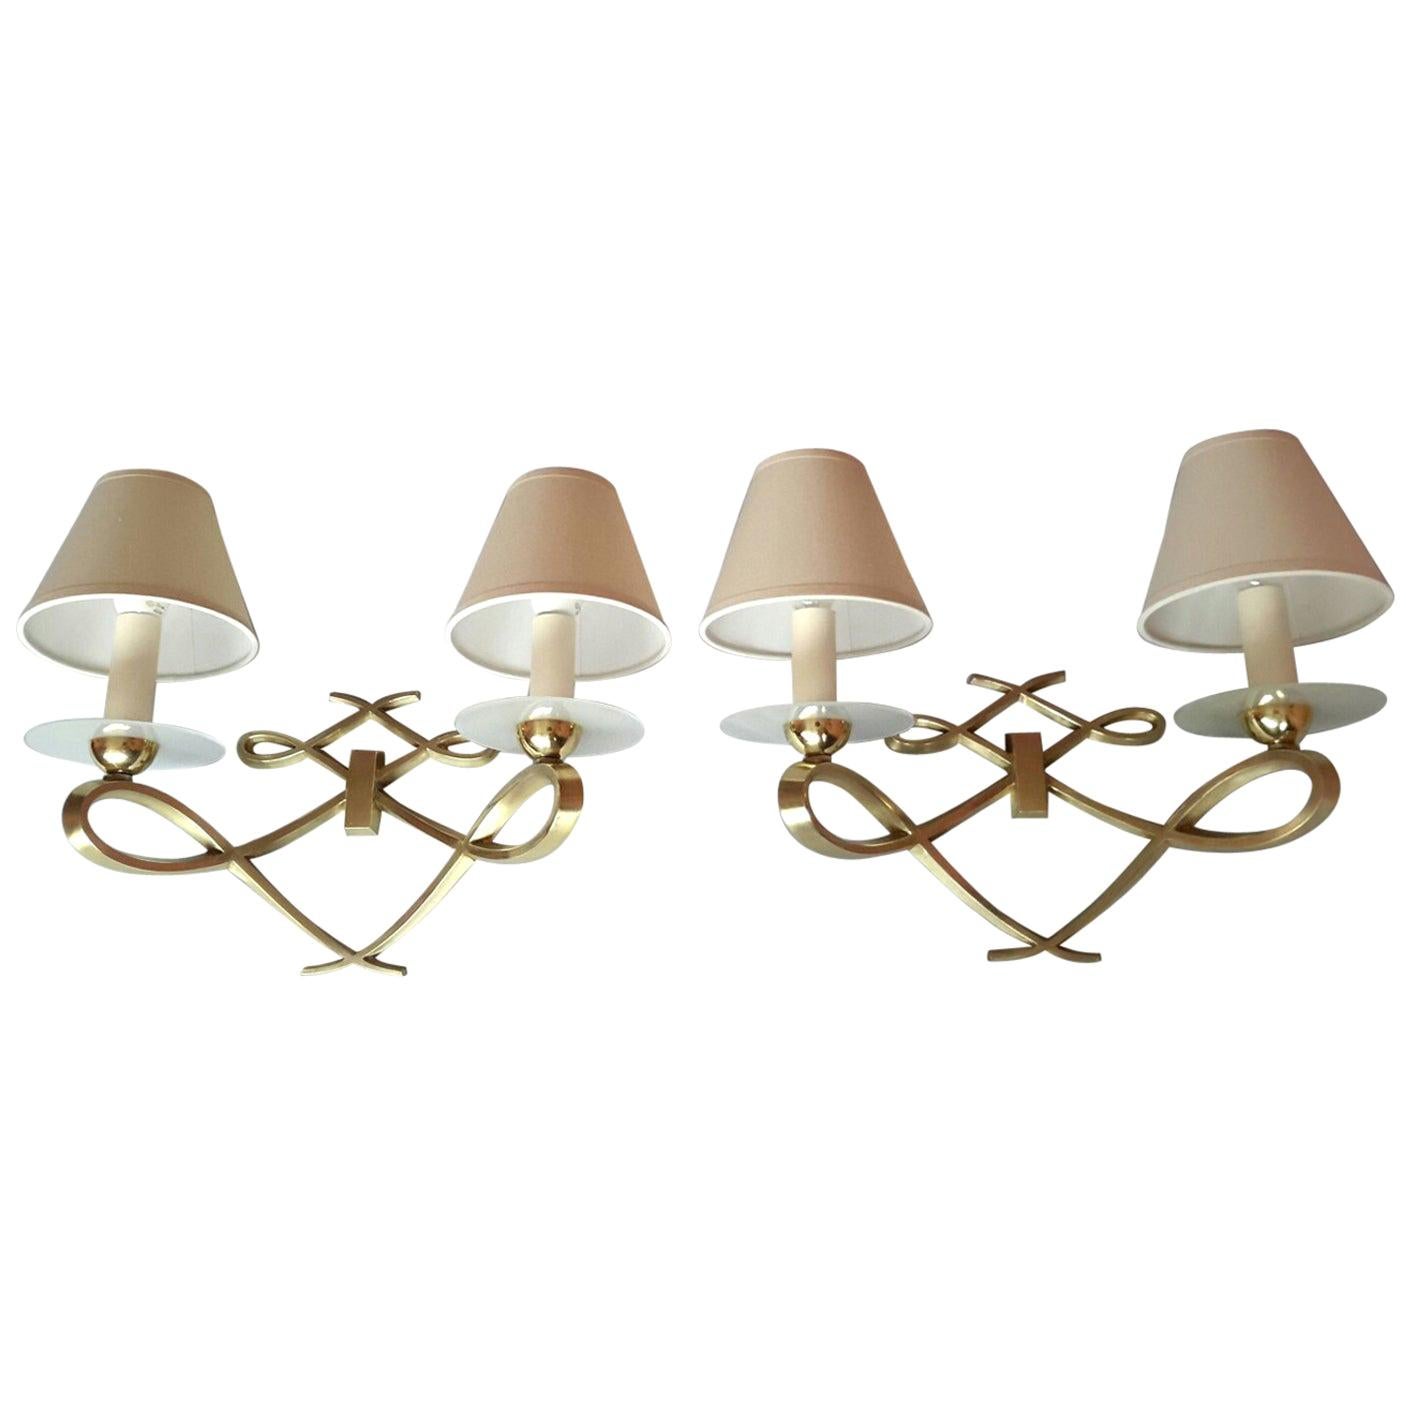 Pair of French Double Sconces Leleu Style by Arlus, France, 1950